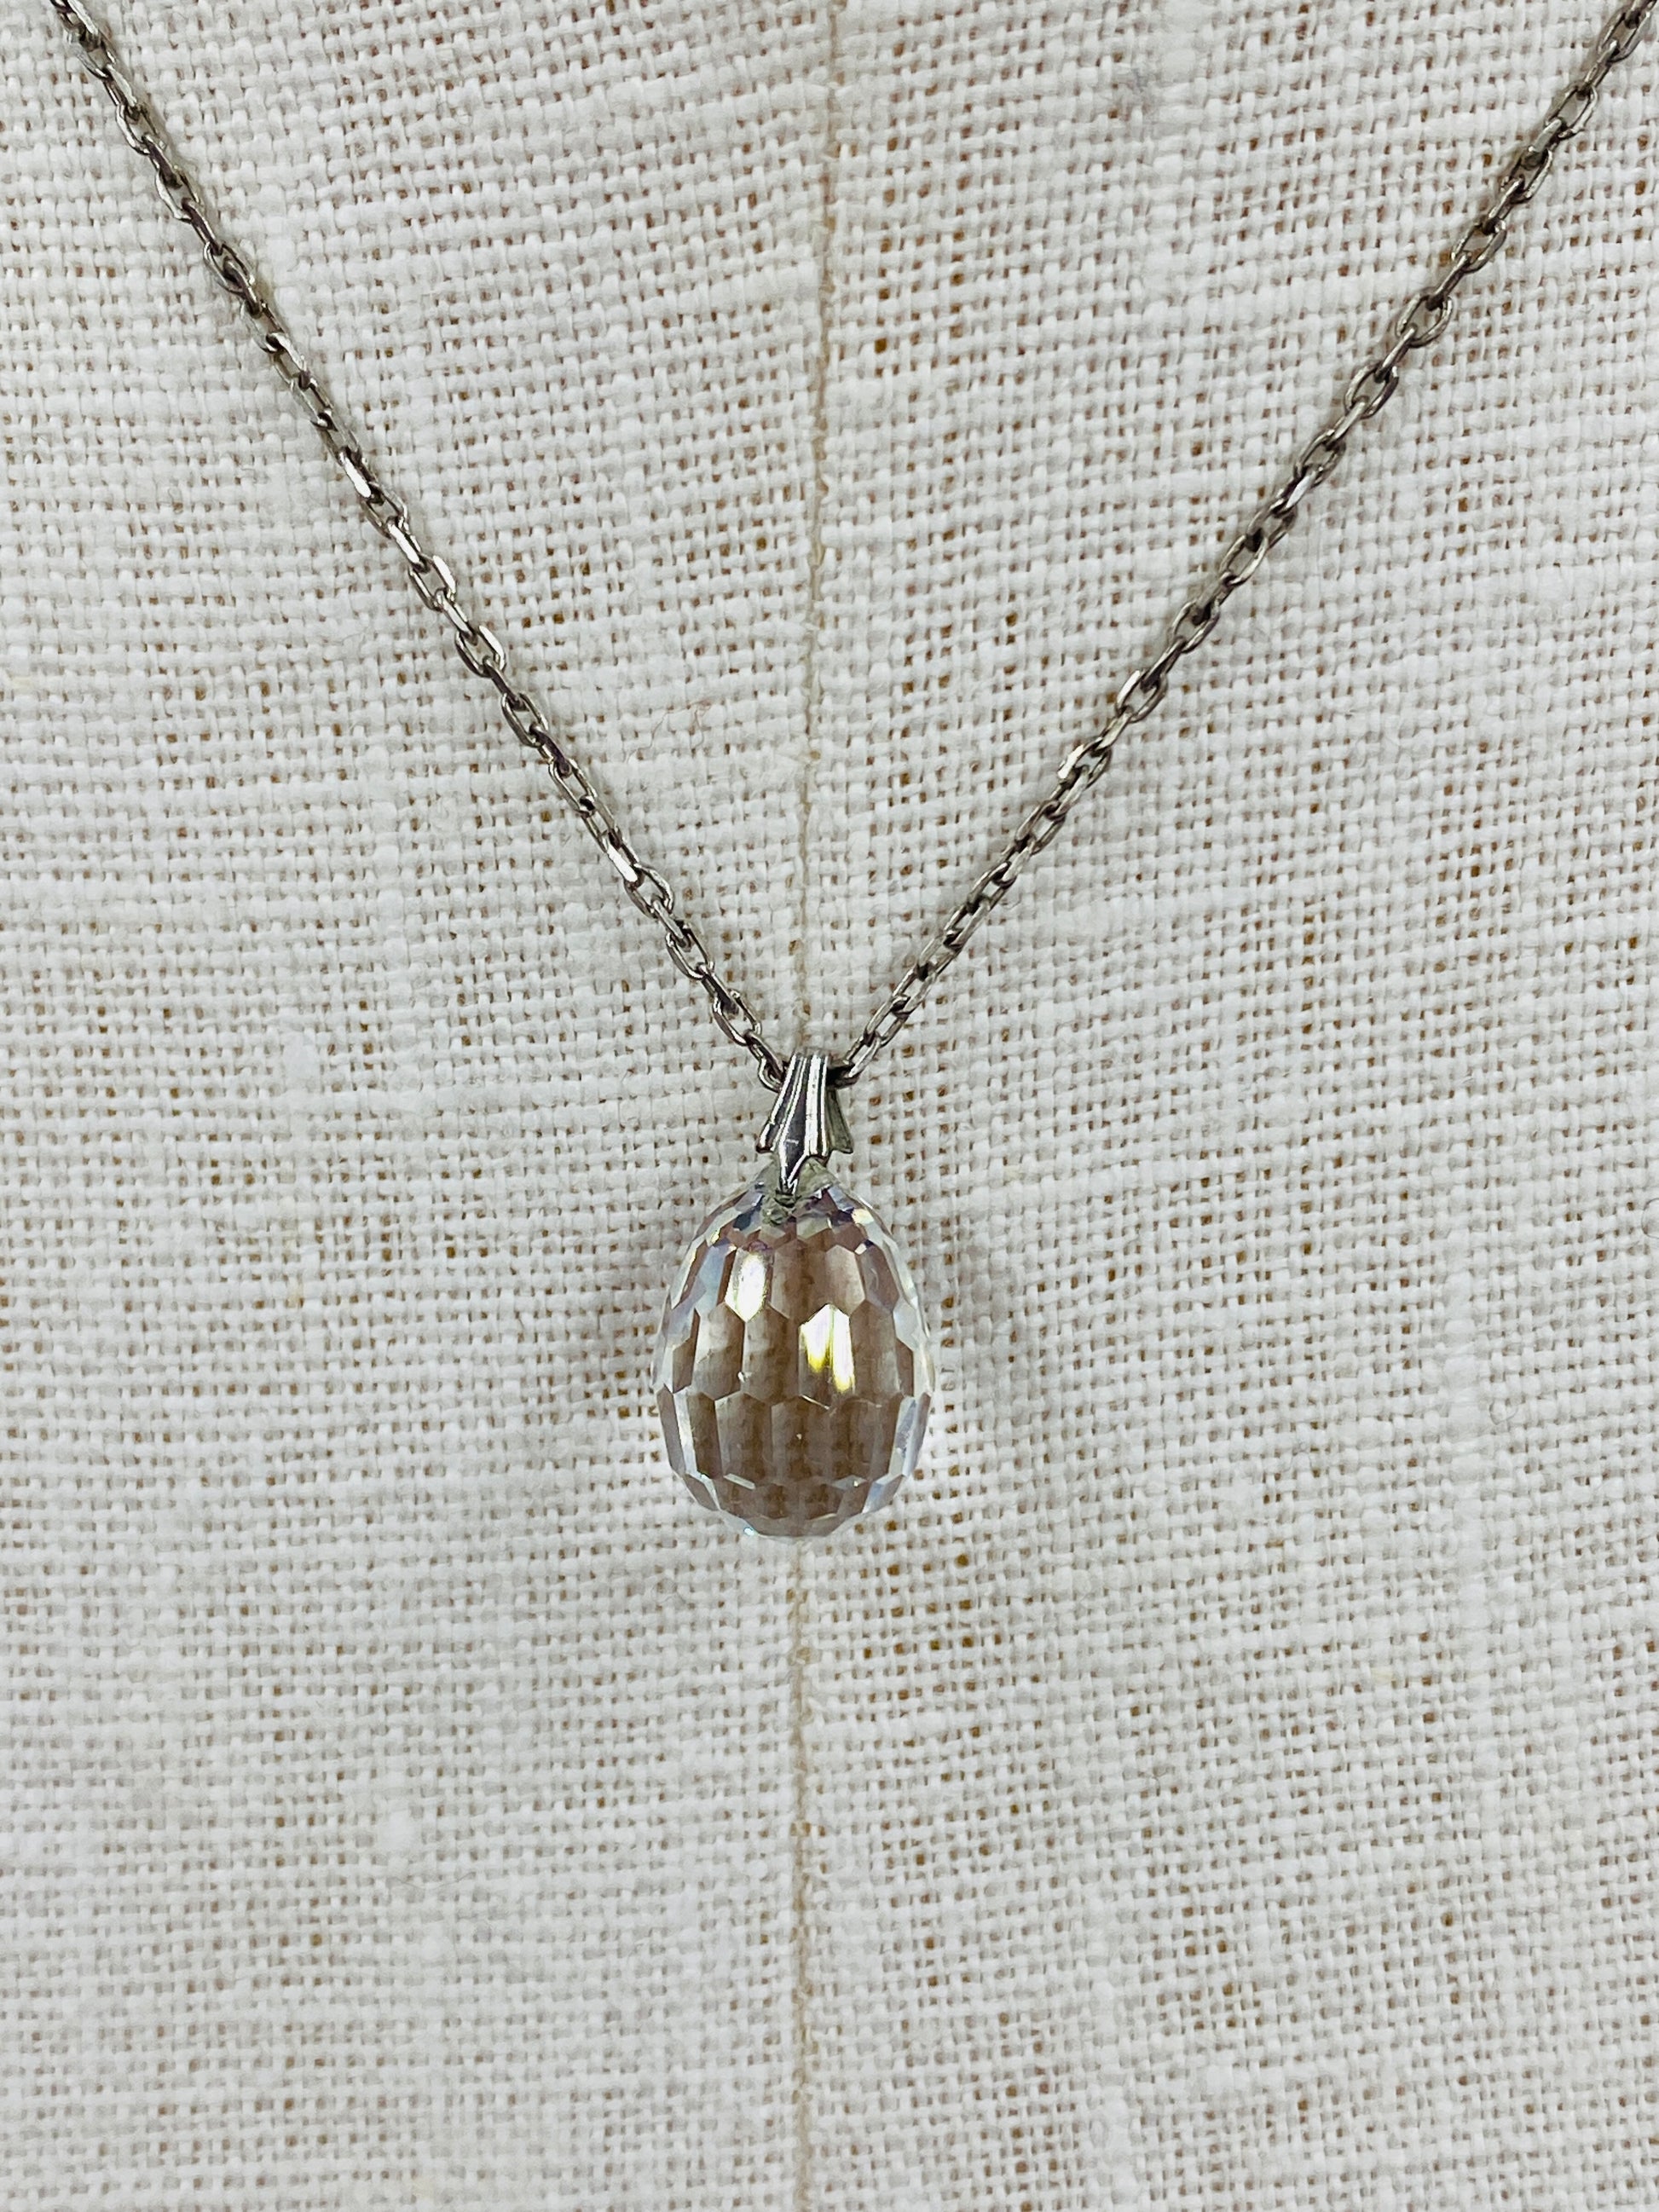 Vintage 1930s Dainty Silver Necklace with Crystal Teardrop Pendant 